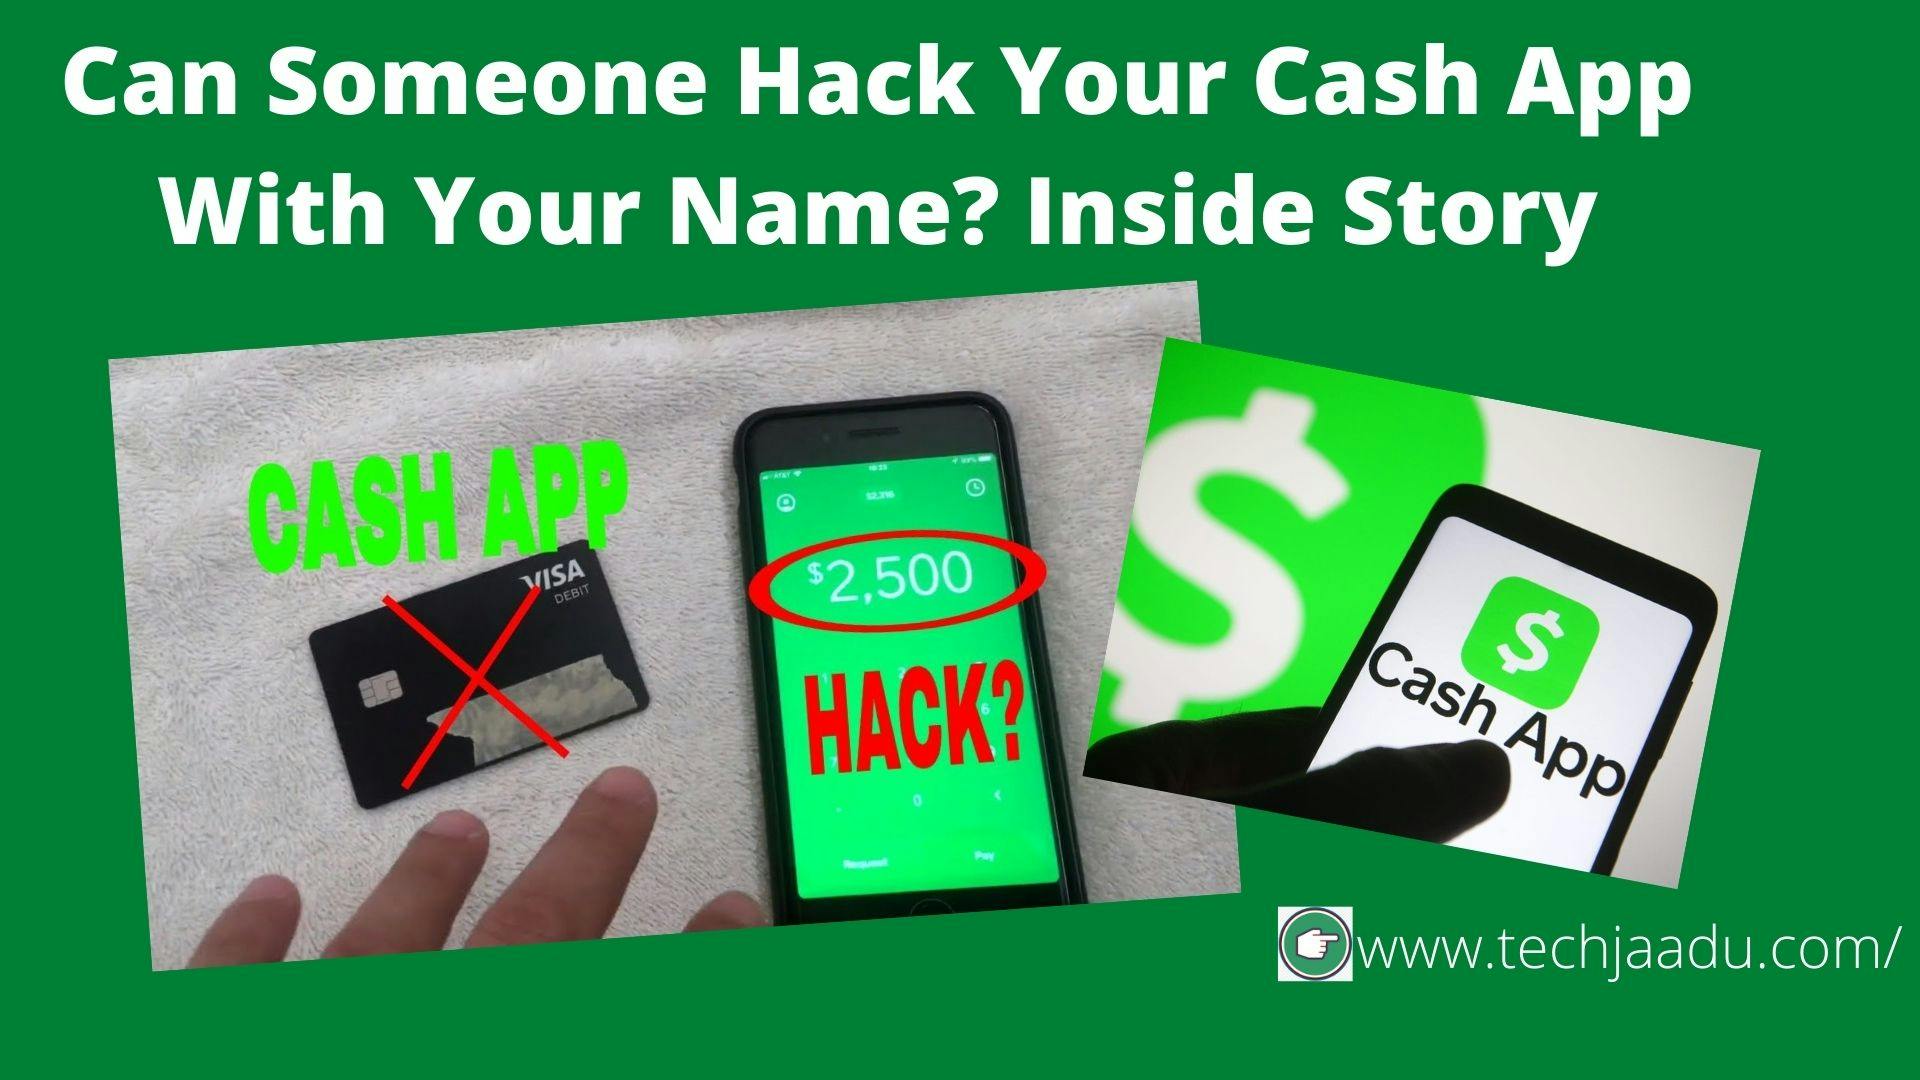 Can Someone Hack Your Cash App With Your Name Inside Story (1).jpg